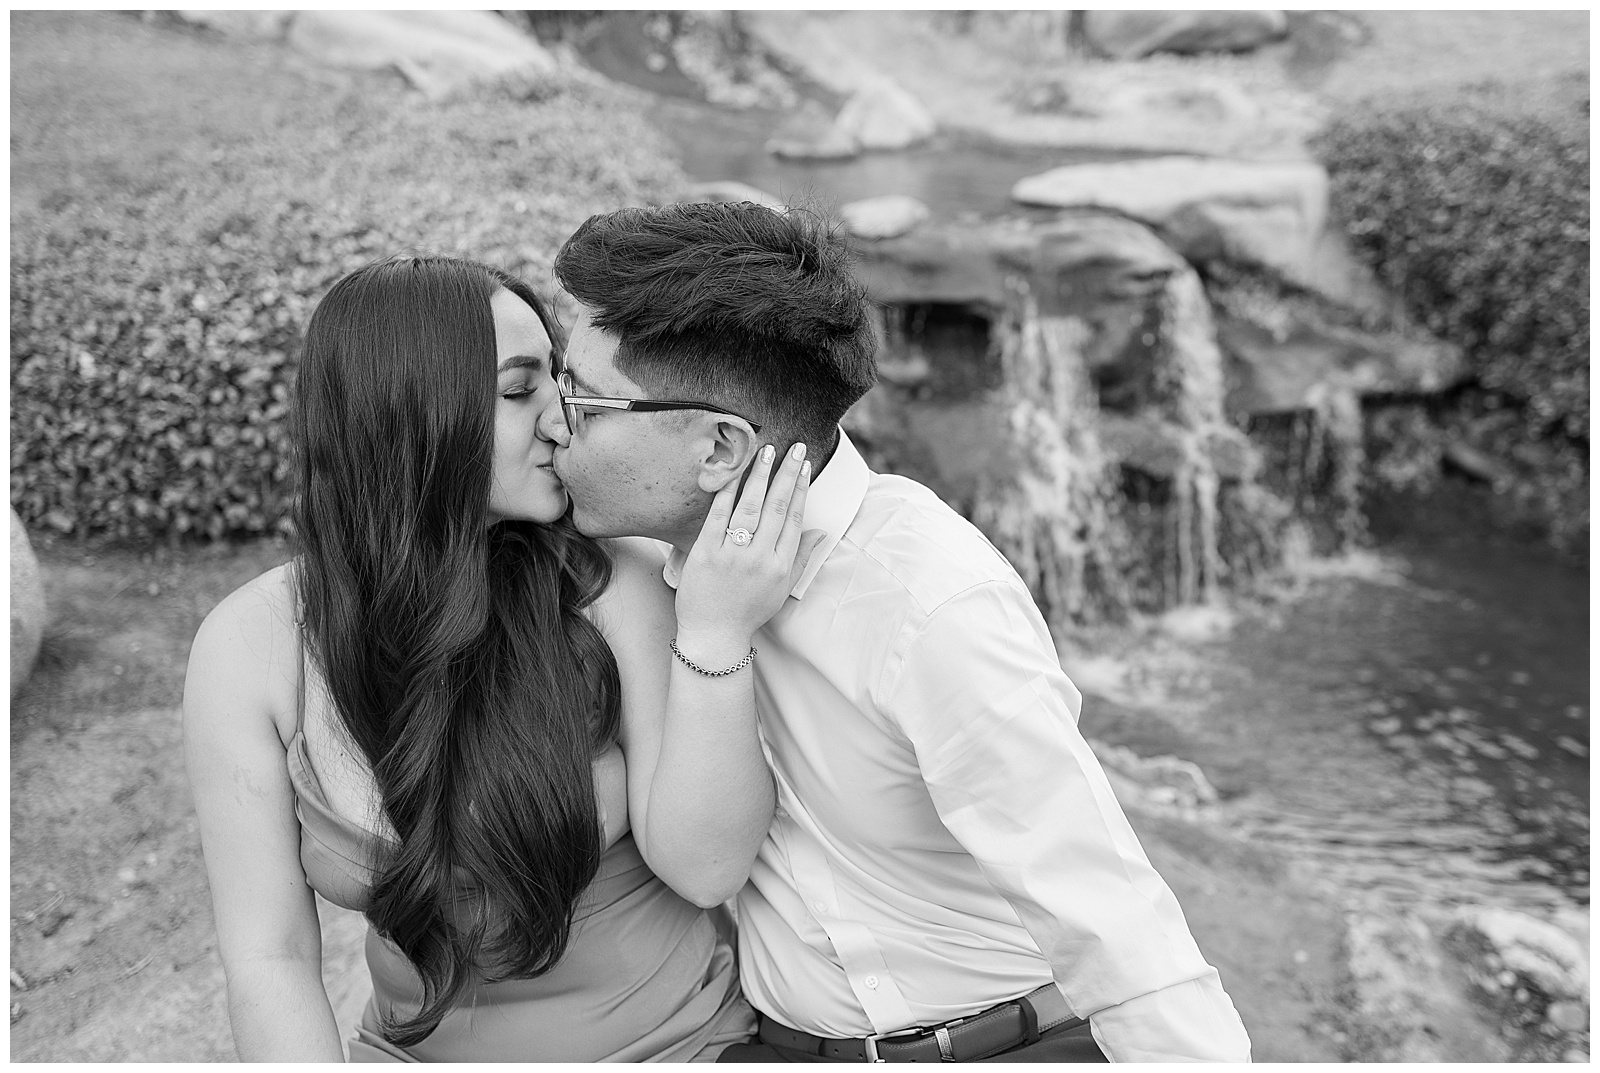 black and white photo engaged couple kissing waterfall in background